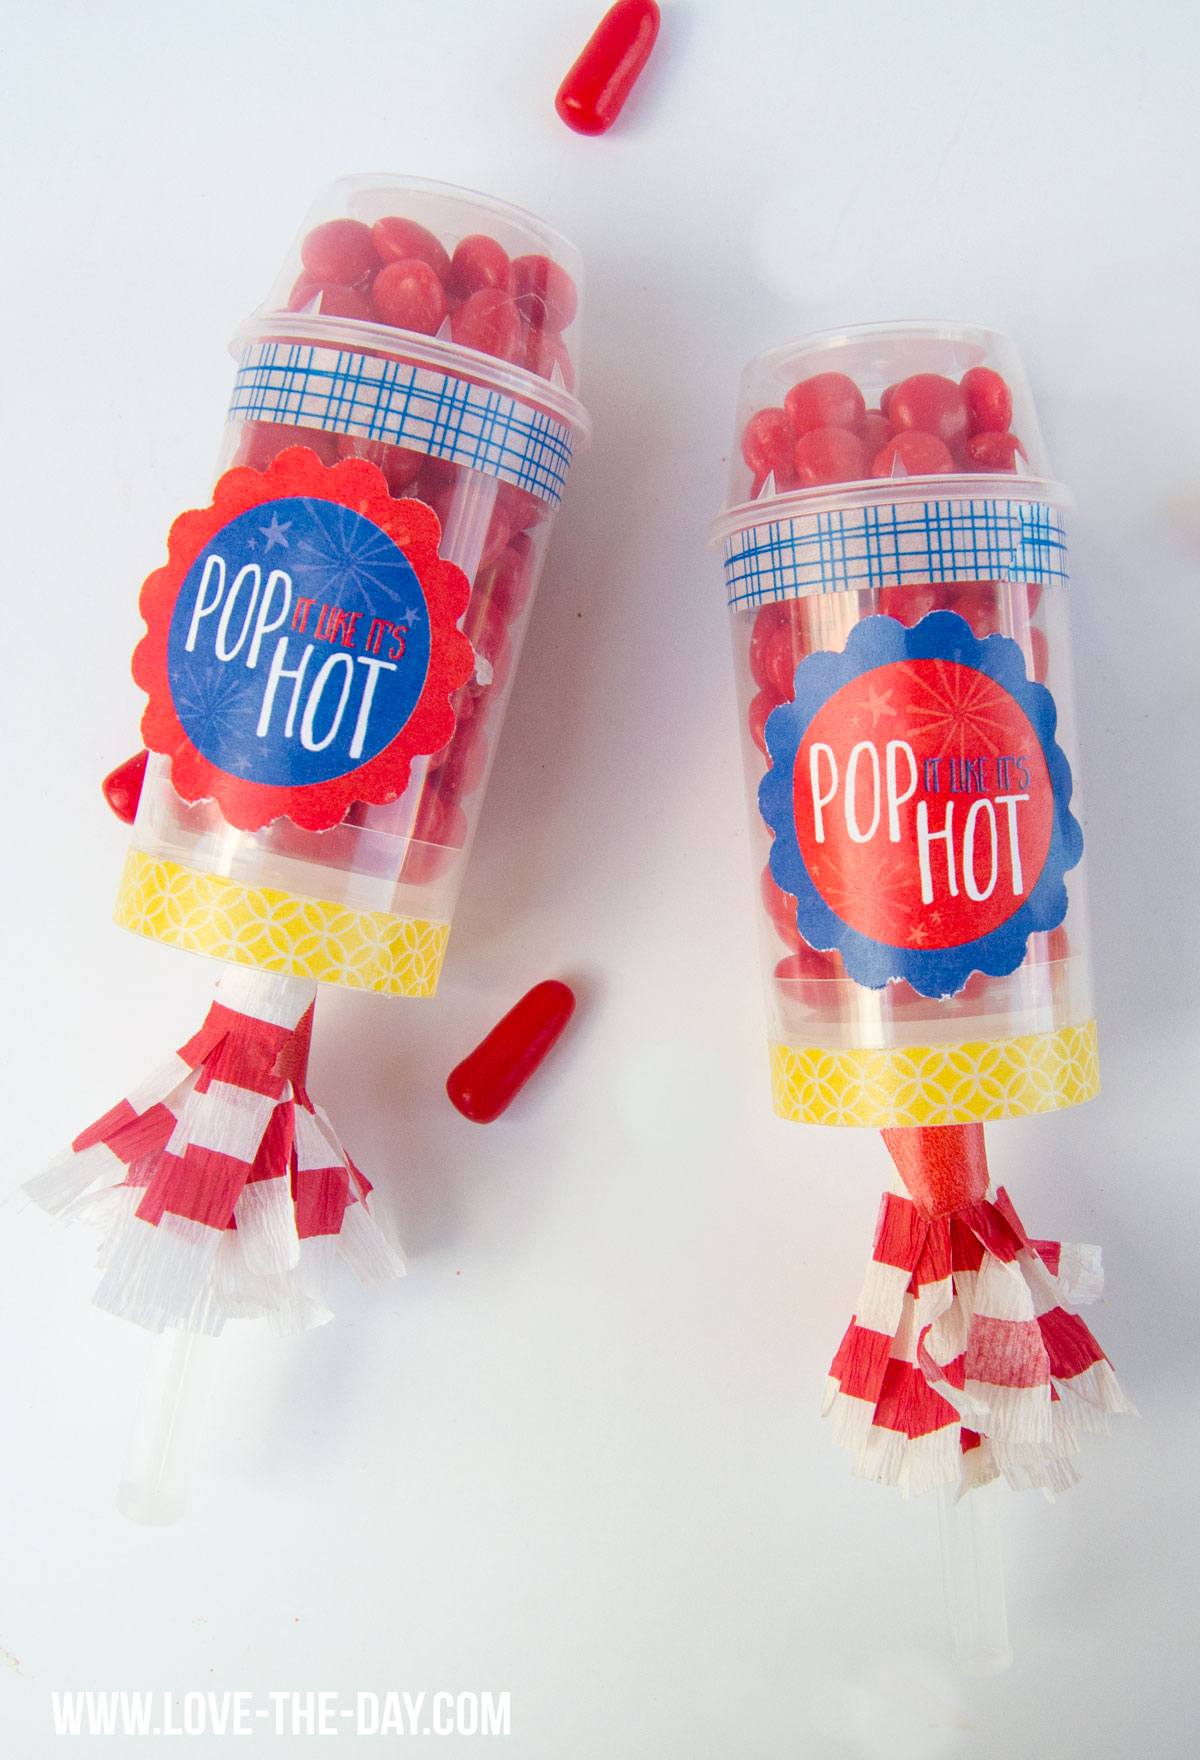 Pop it like it’s hot:: july 4th crafts by love the day